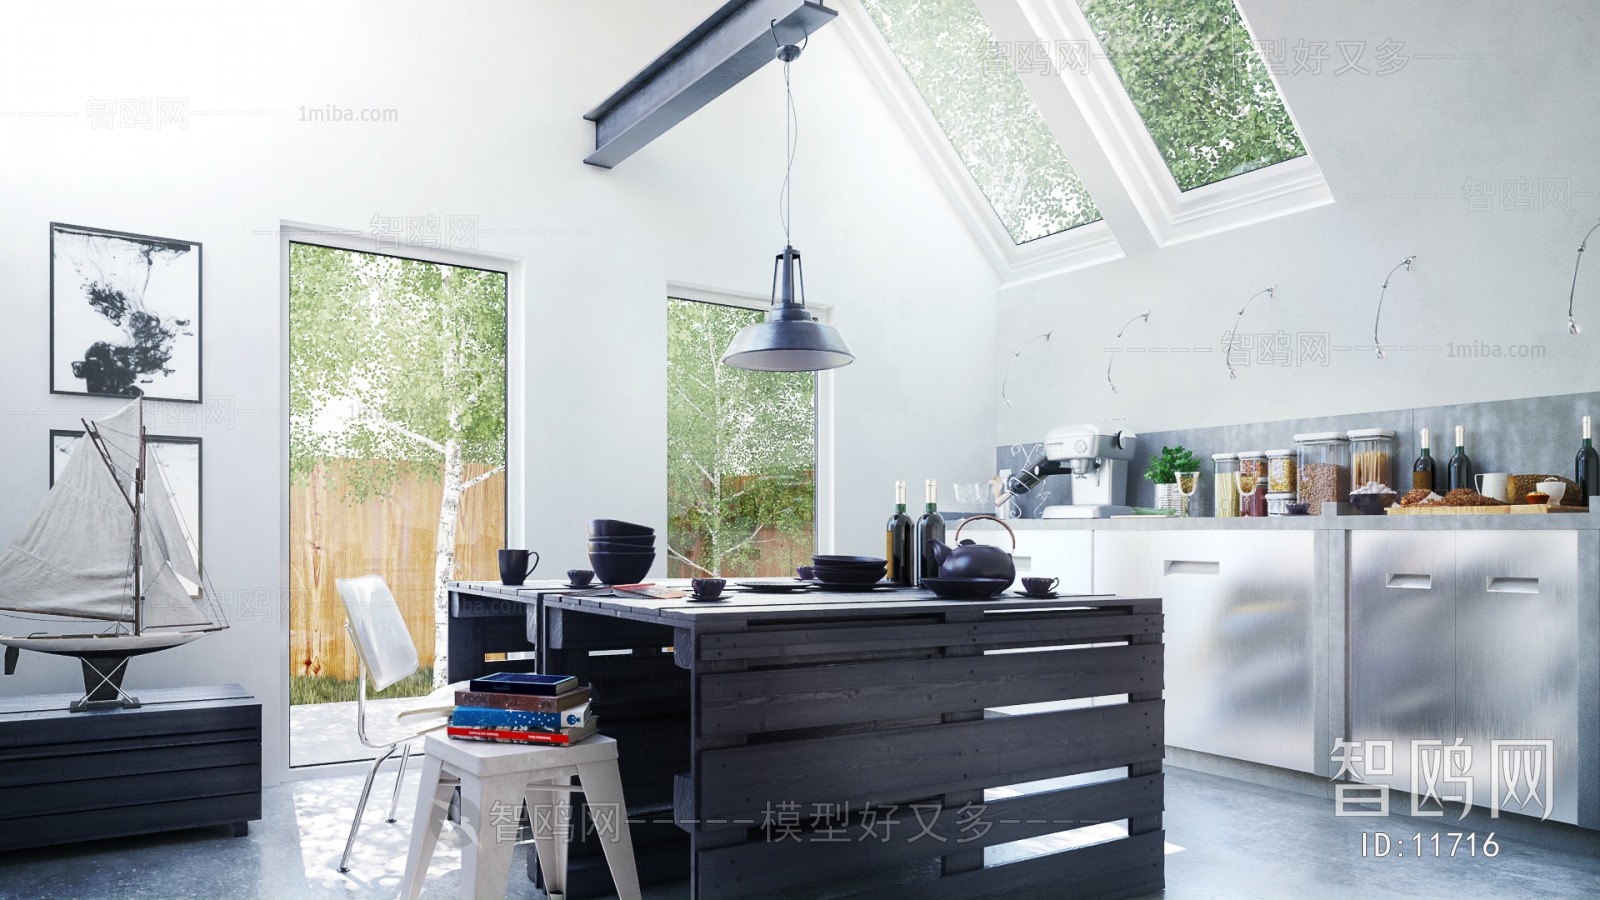 Modern Nordic Style The Kitchen